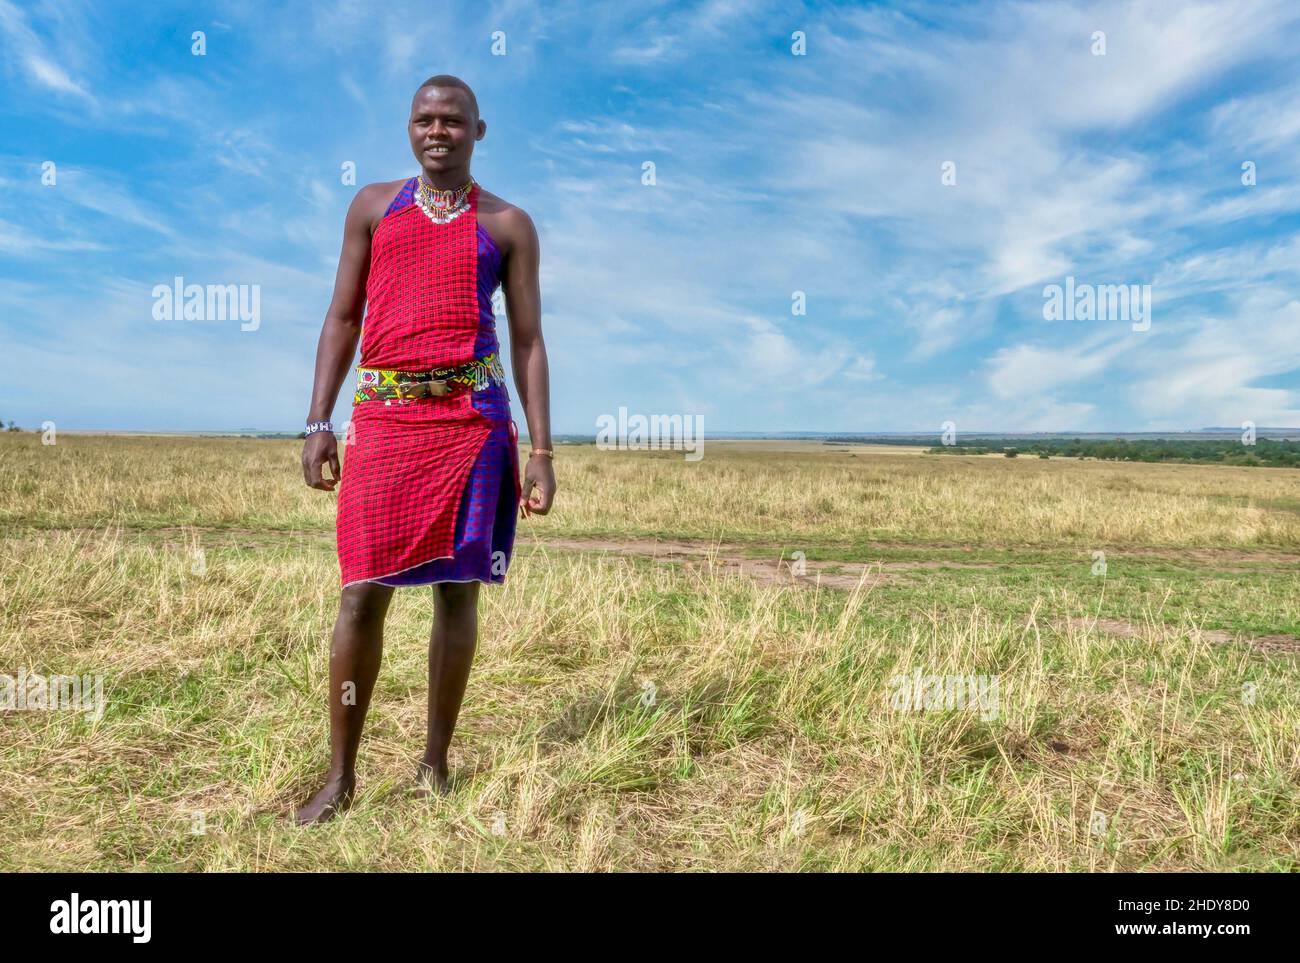 Masai Mara, Kenya - Sept. 29, 2013. A male member of the Maasai tribe stands tall wearing traditional clothing and jewelry, with a wide shot of the sa Stock Photo